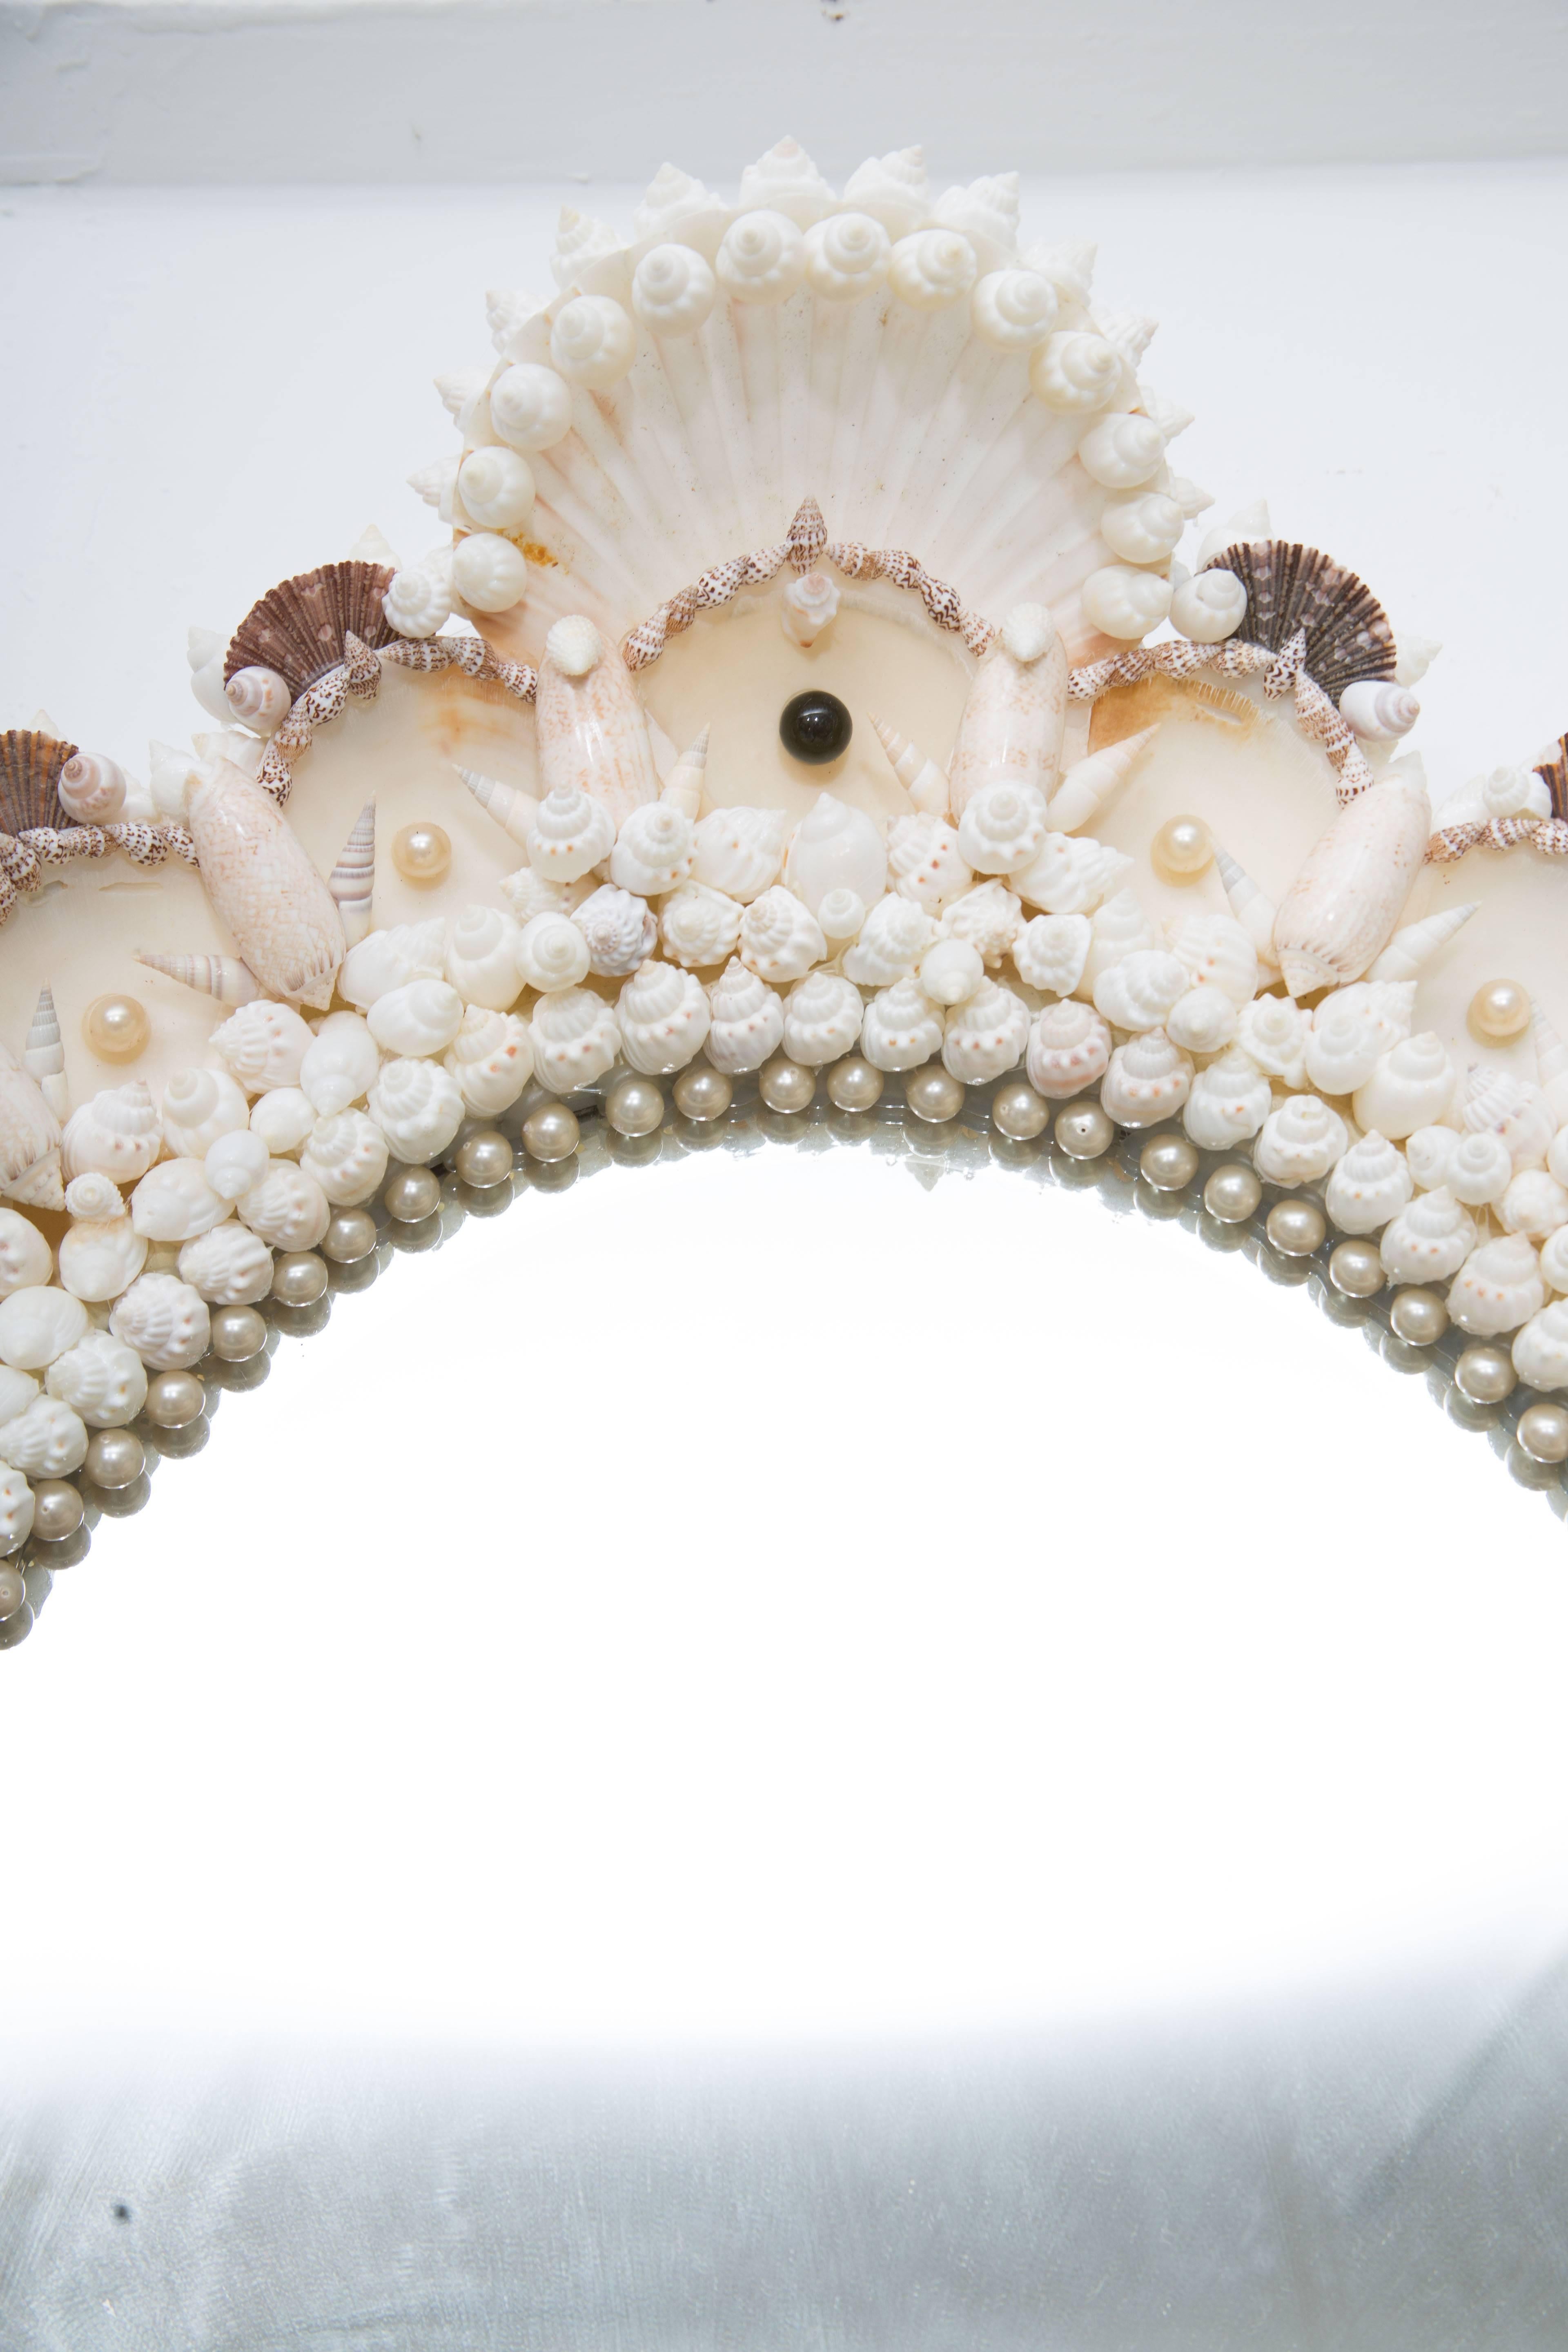 This romantic and delicate custom oval mirror has a beautiful frame of artistically encrusted shells accented with simulated pearls, circa 20th century.